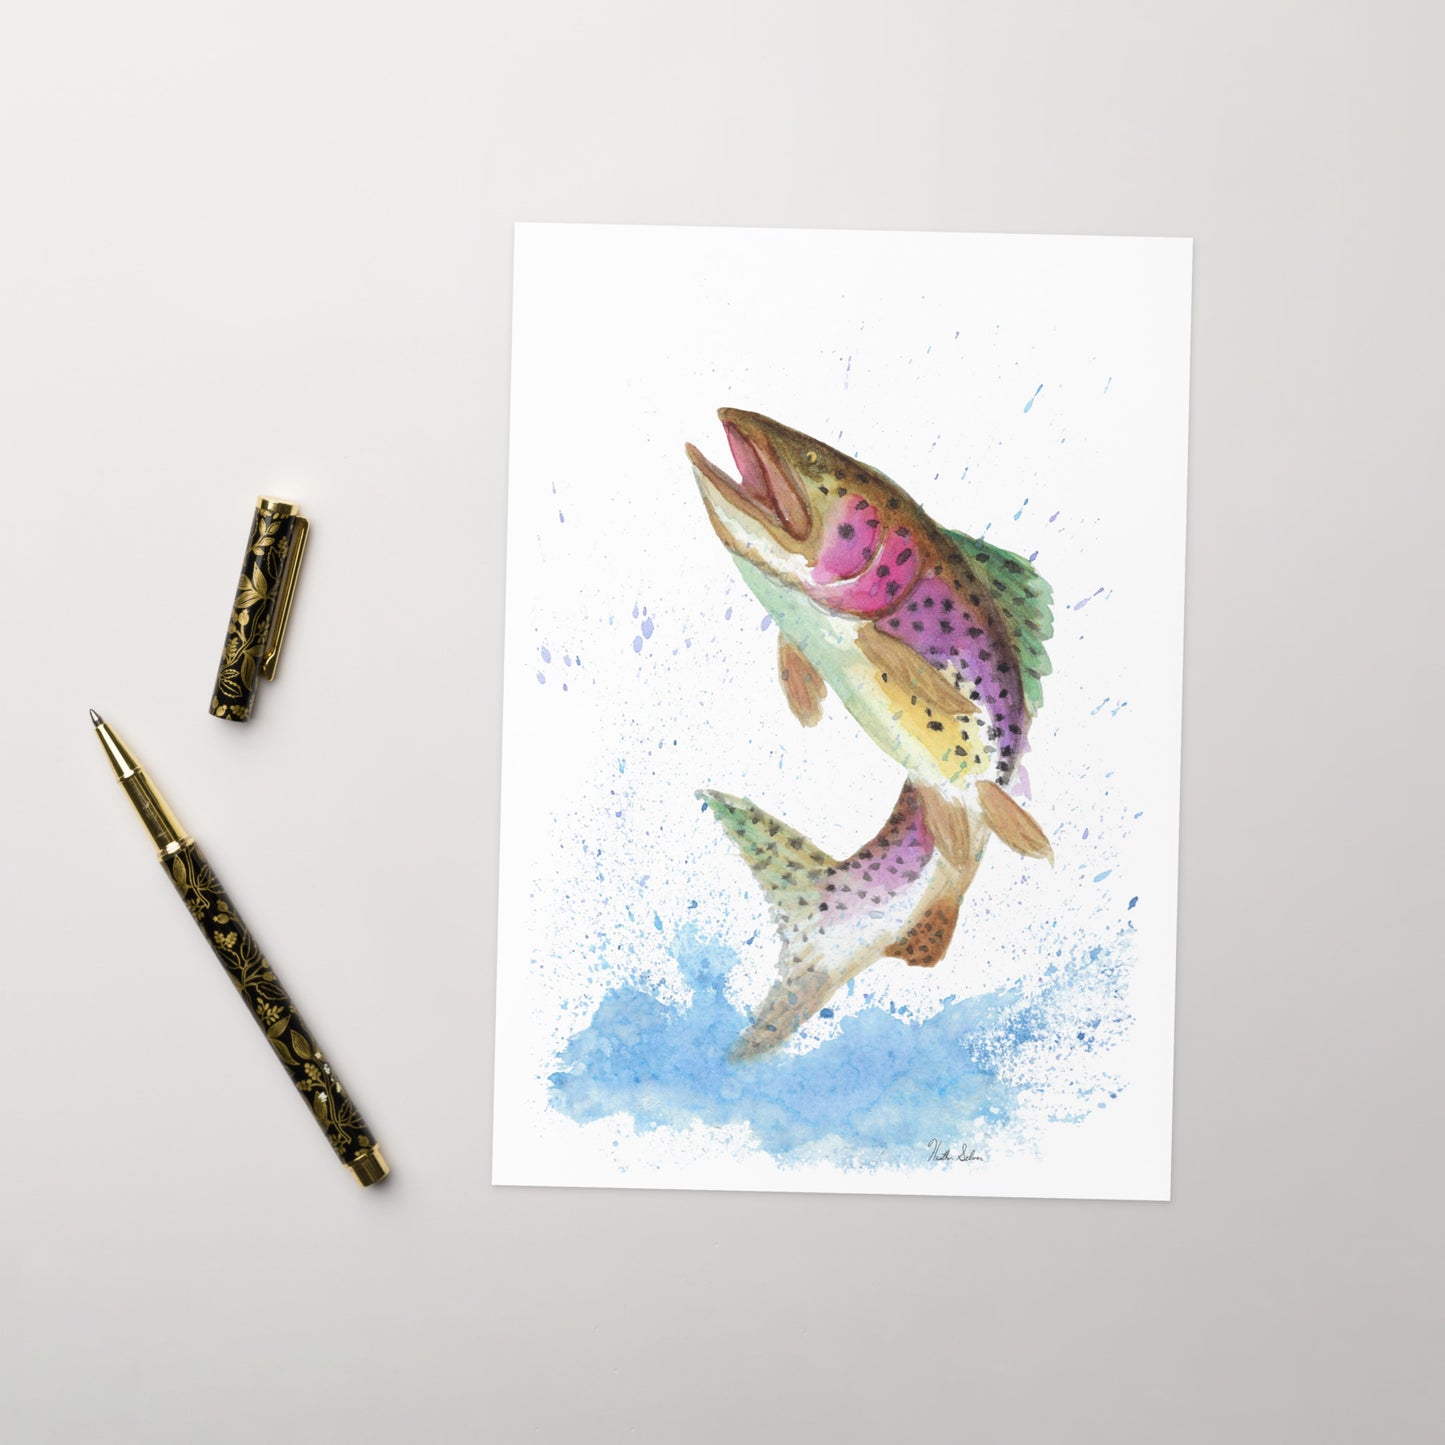 Ten greeting cards with print of watercolor rainbow trout on the front. Inside is blank. Comes with envelopes. Cards measure 5.5 by 8.5 inches. Made with 350 gsm 150lb coated paperboard with vibrant printing. Shown on tabletop by ballpoint pen.